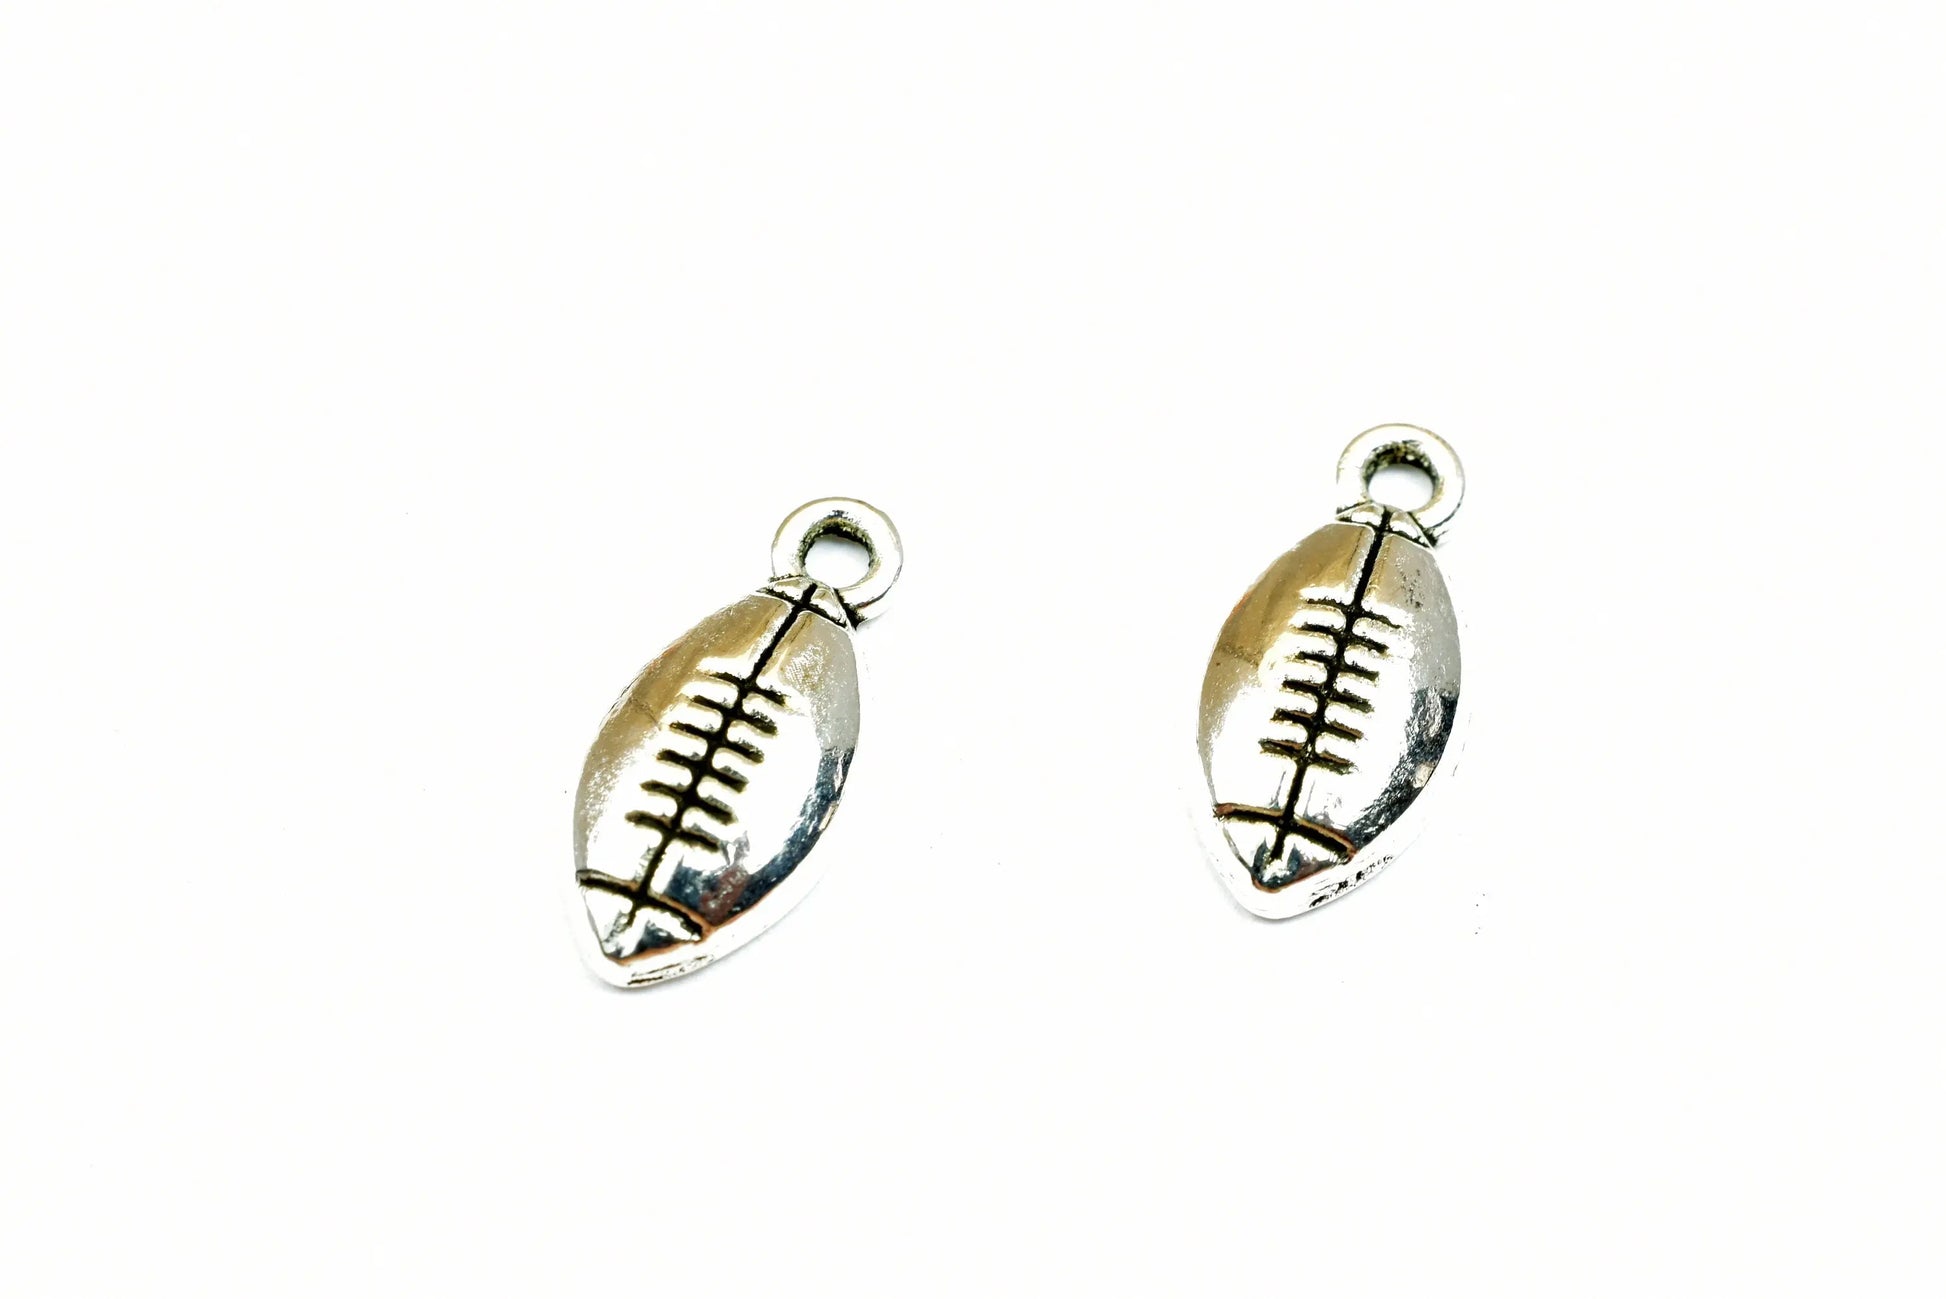 American Football Sport Charms Size 15x7mm Silver Color Charm Pendant Finding For Jewelry Making 32PCs Per Pack - BeadsFindingDepot